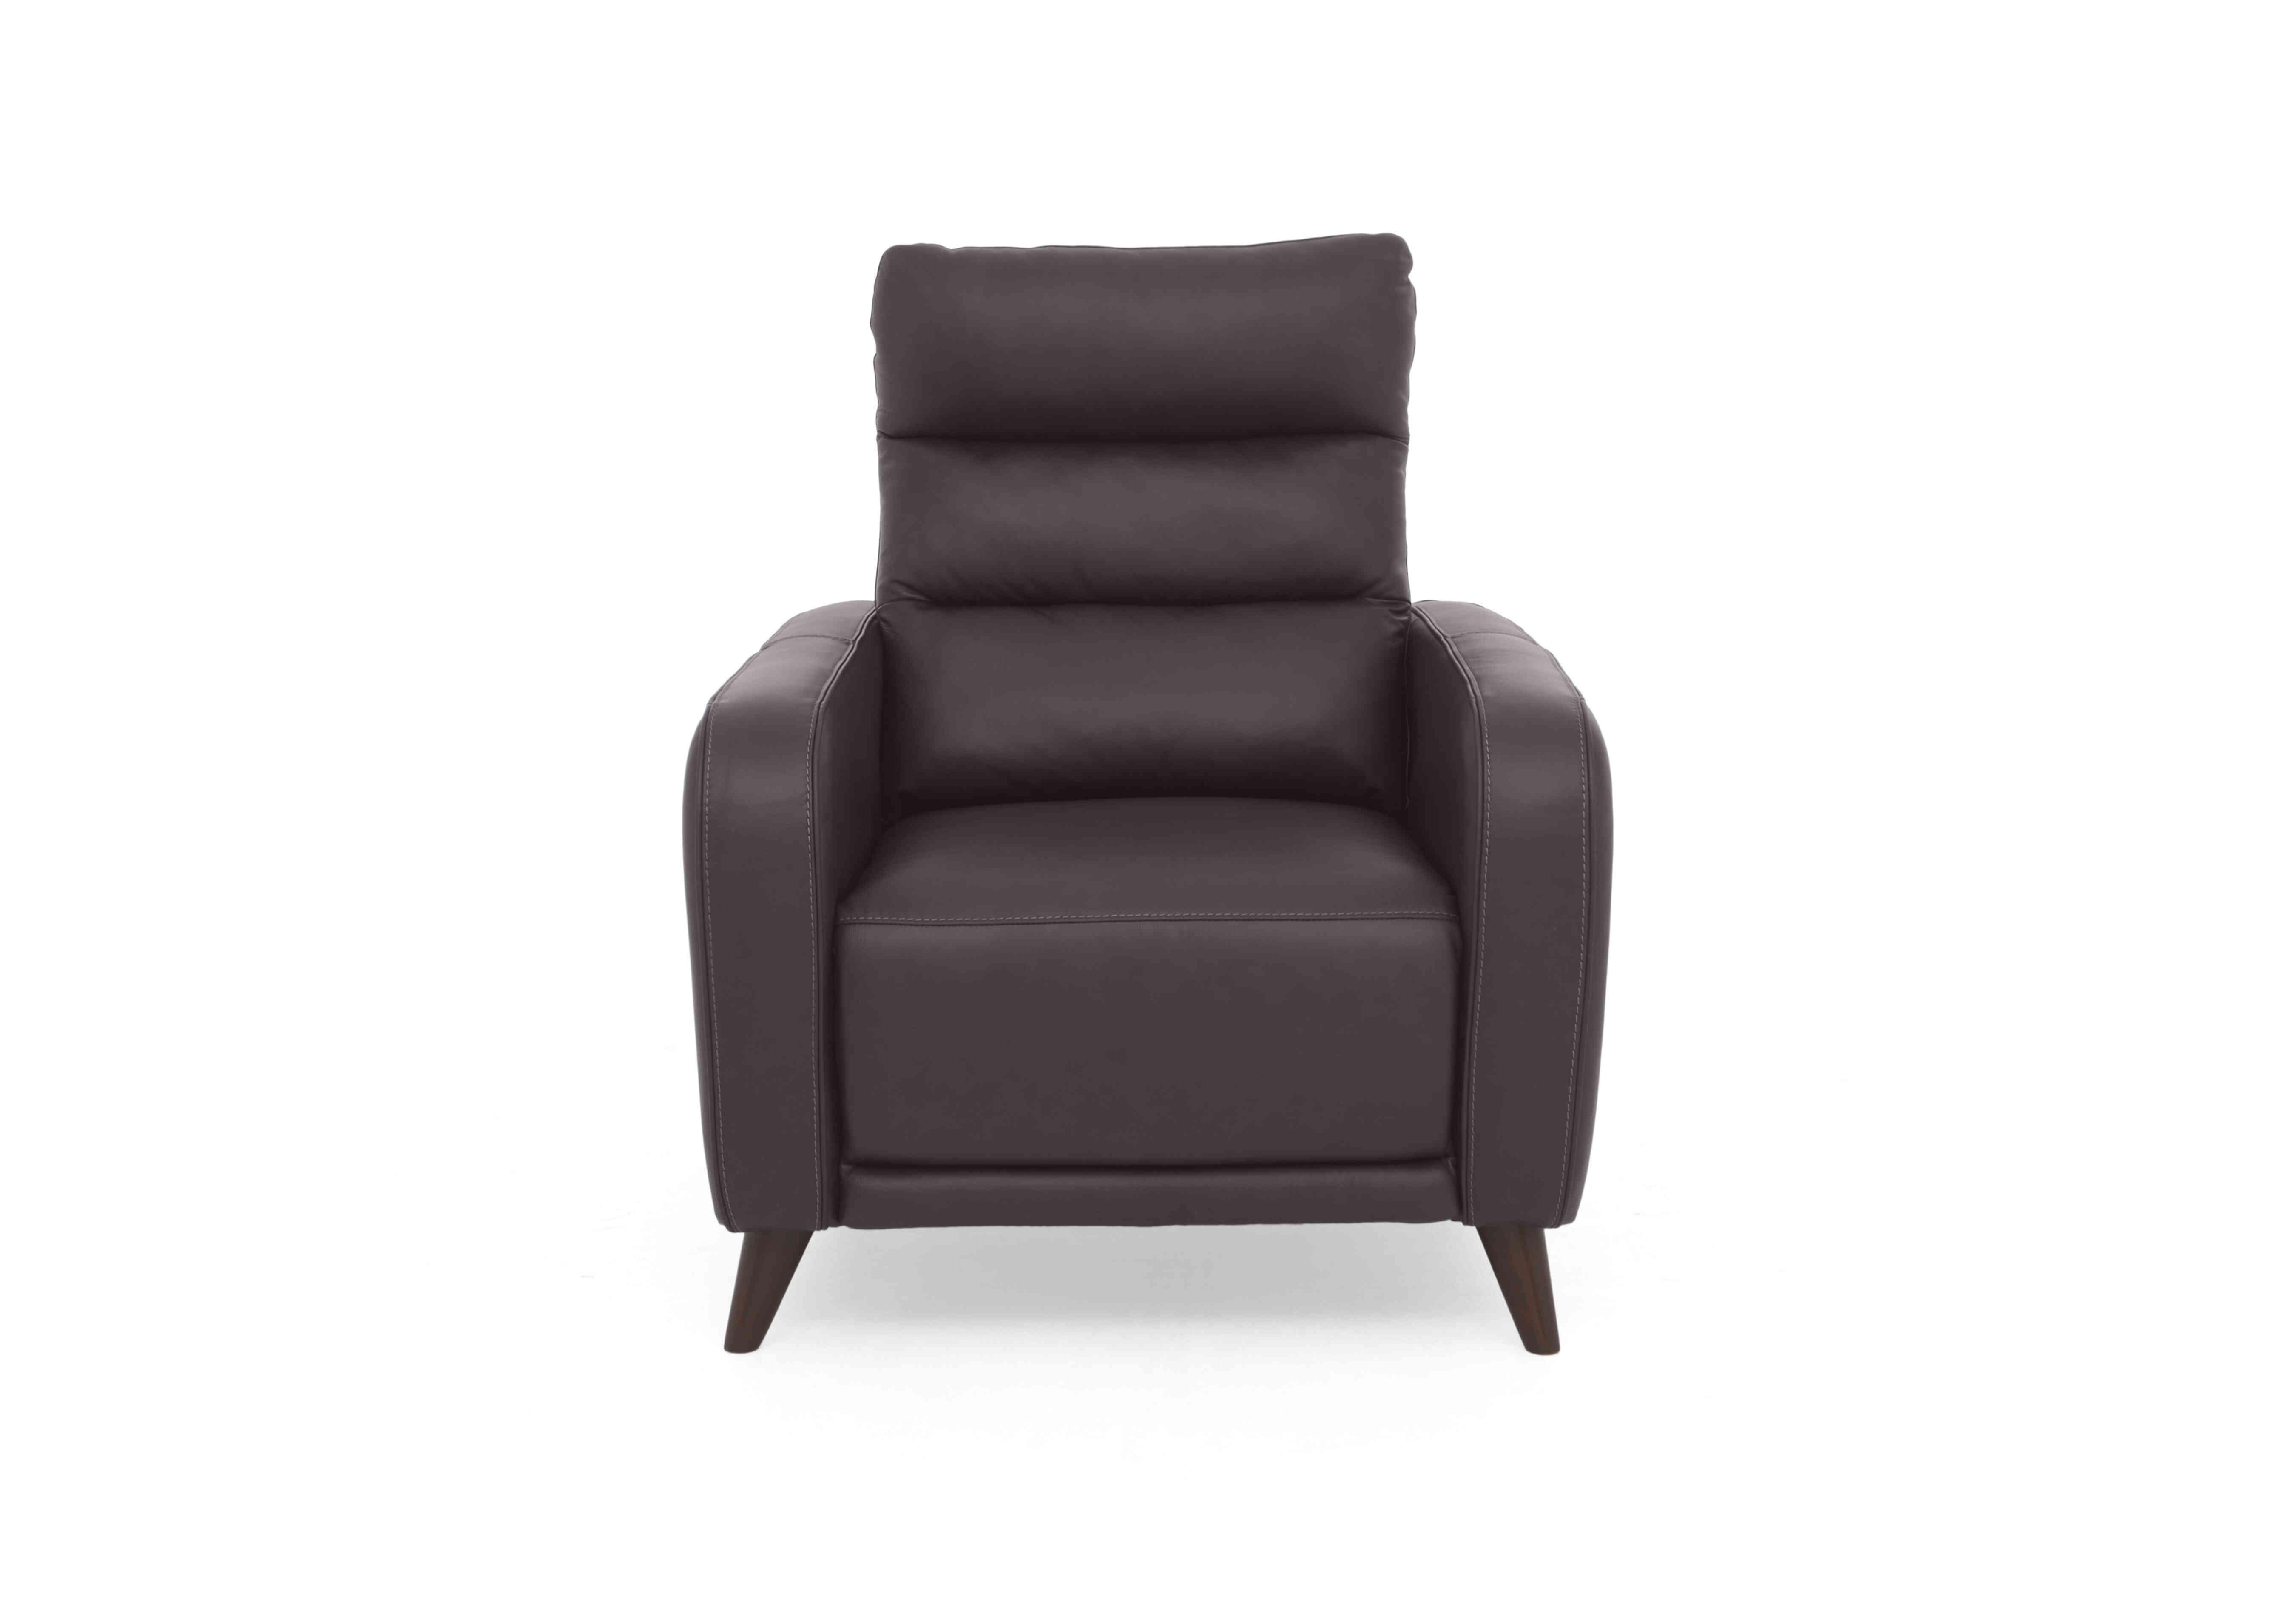 Quinn Leather Chair in Lx-6404 Piompo on Furniture Village